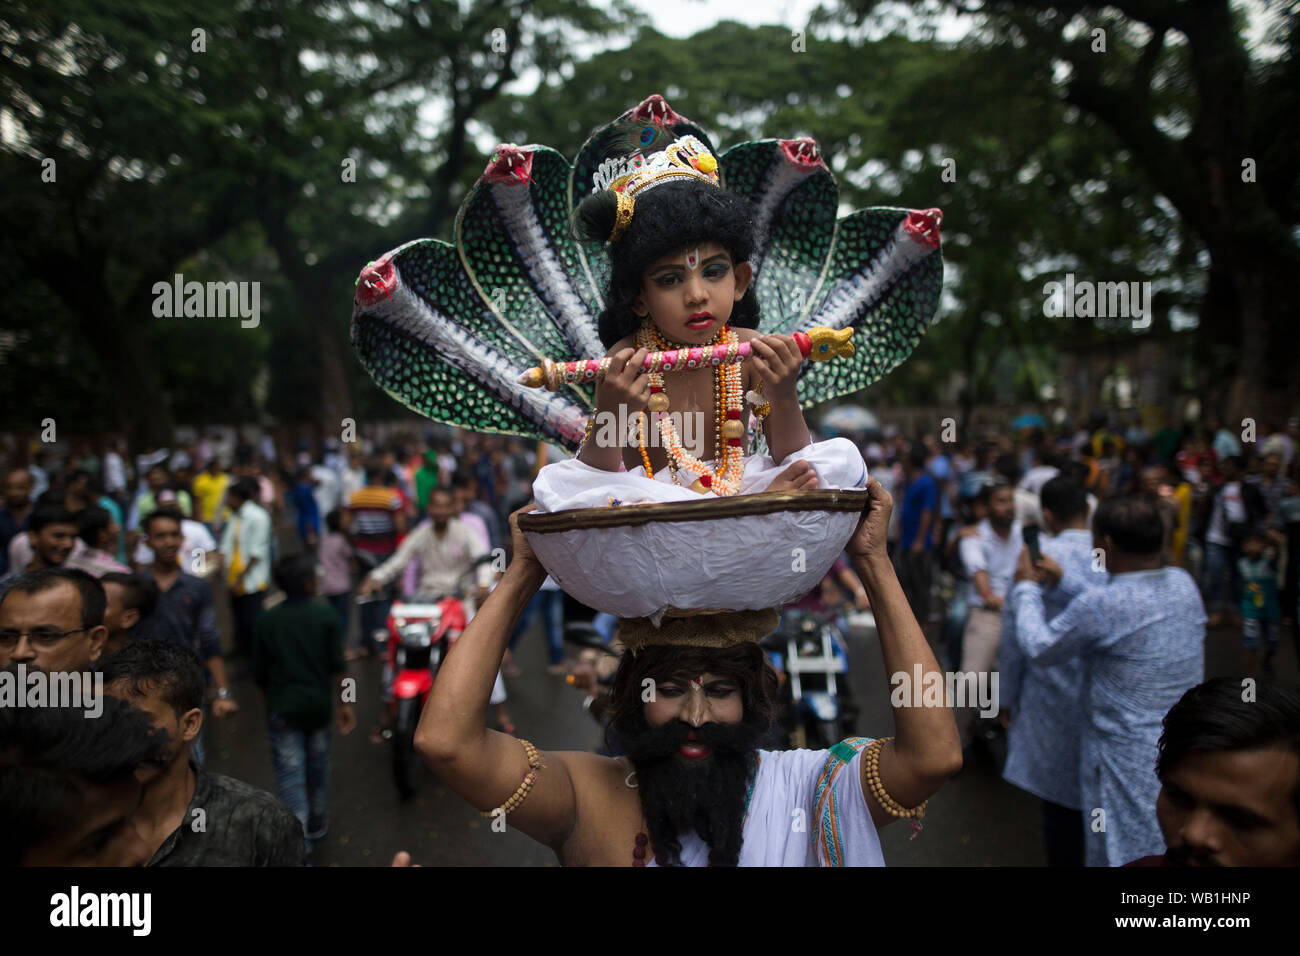 DHAKA, BANGLADESH - AUGUST 23 : Hindu devotees parade as they take part in the celebrations of Janmashtami, a festival marking the birth of Hindu deit Stock Photo